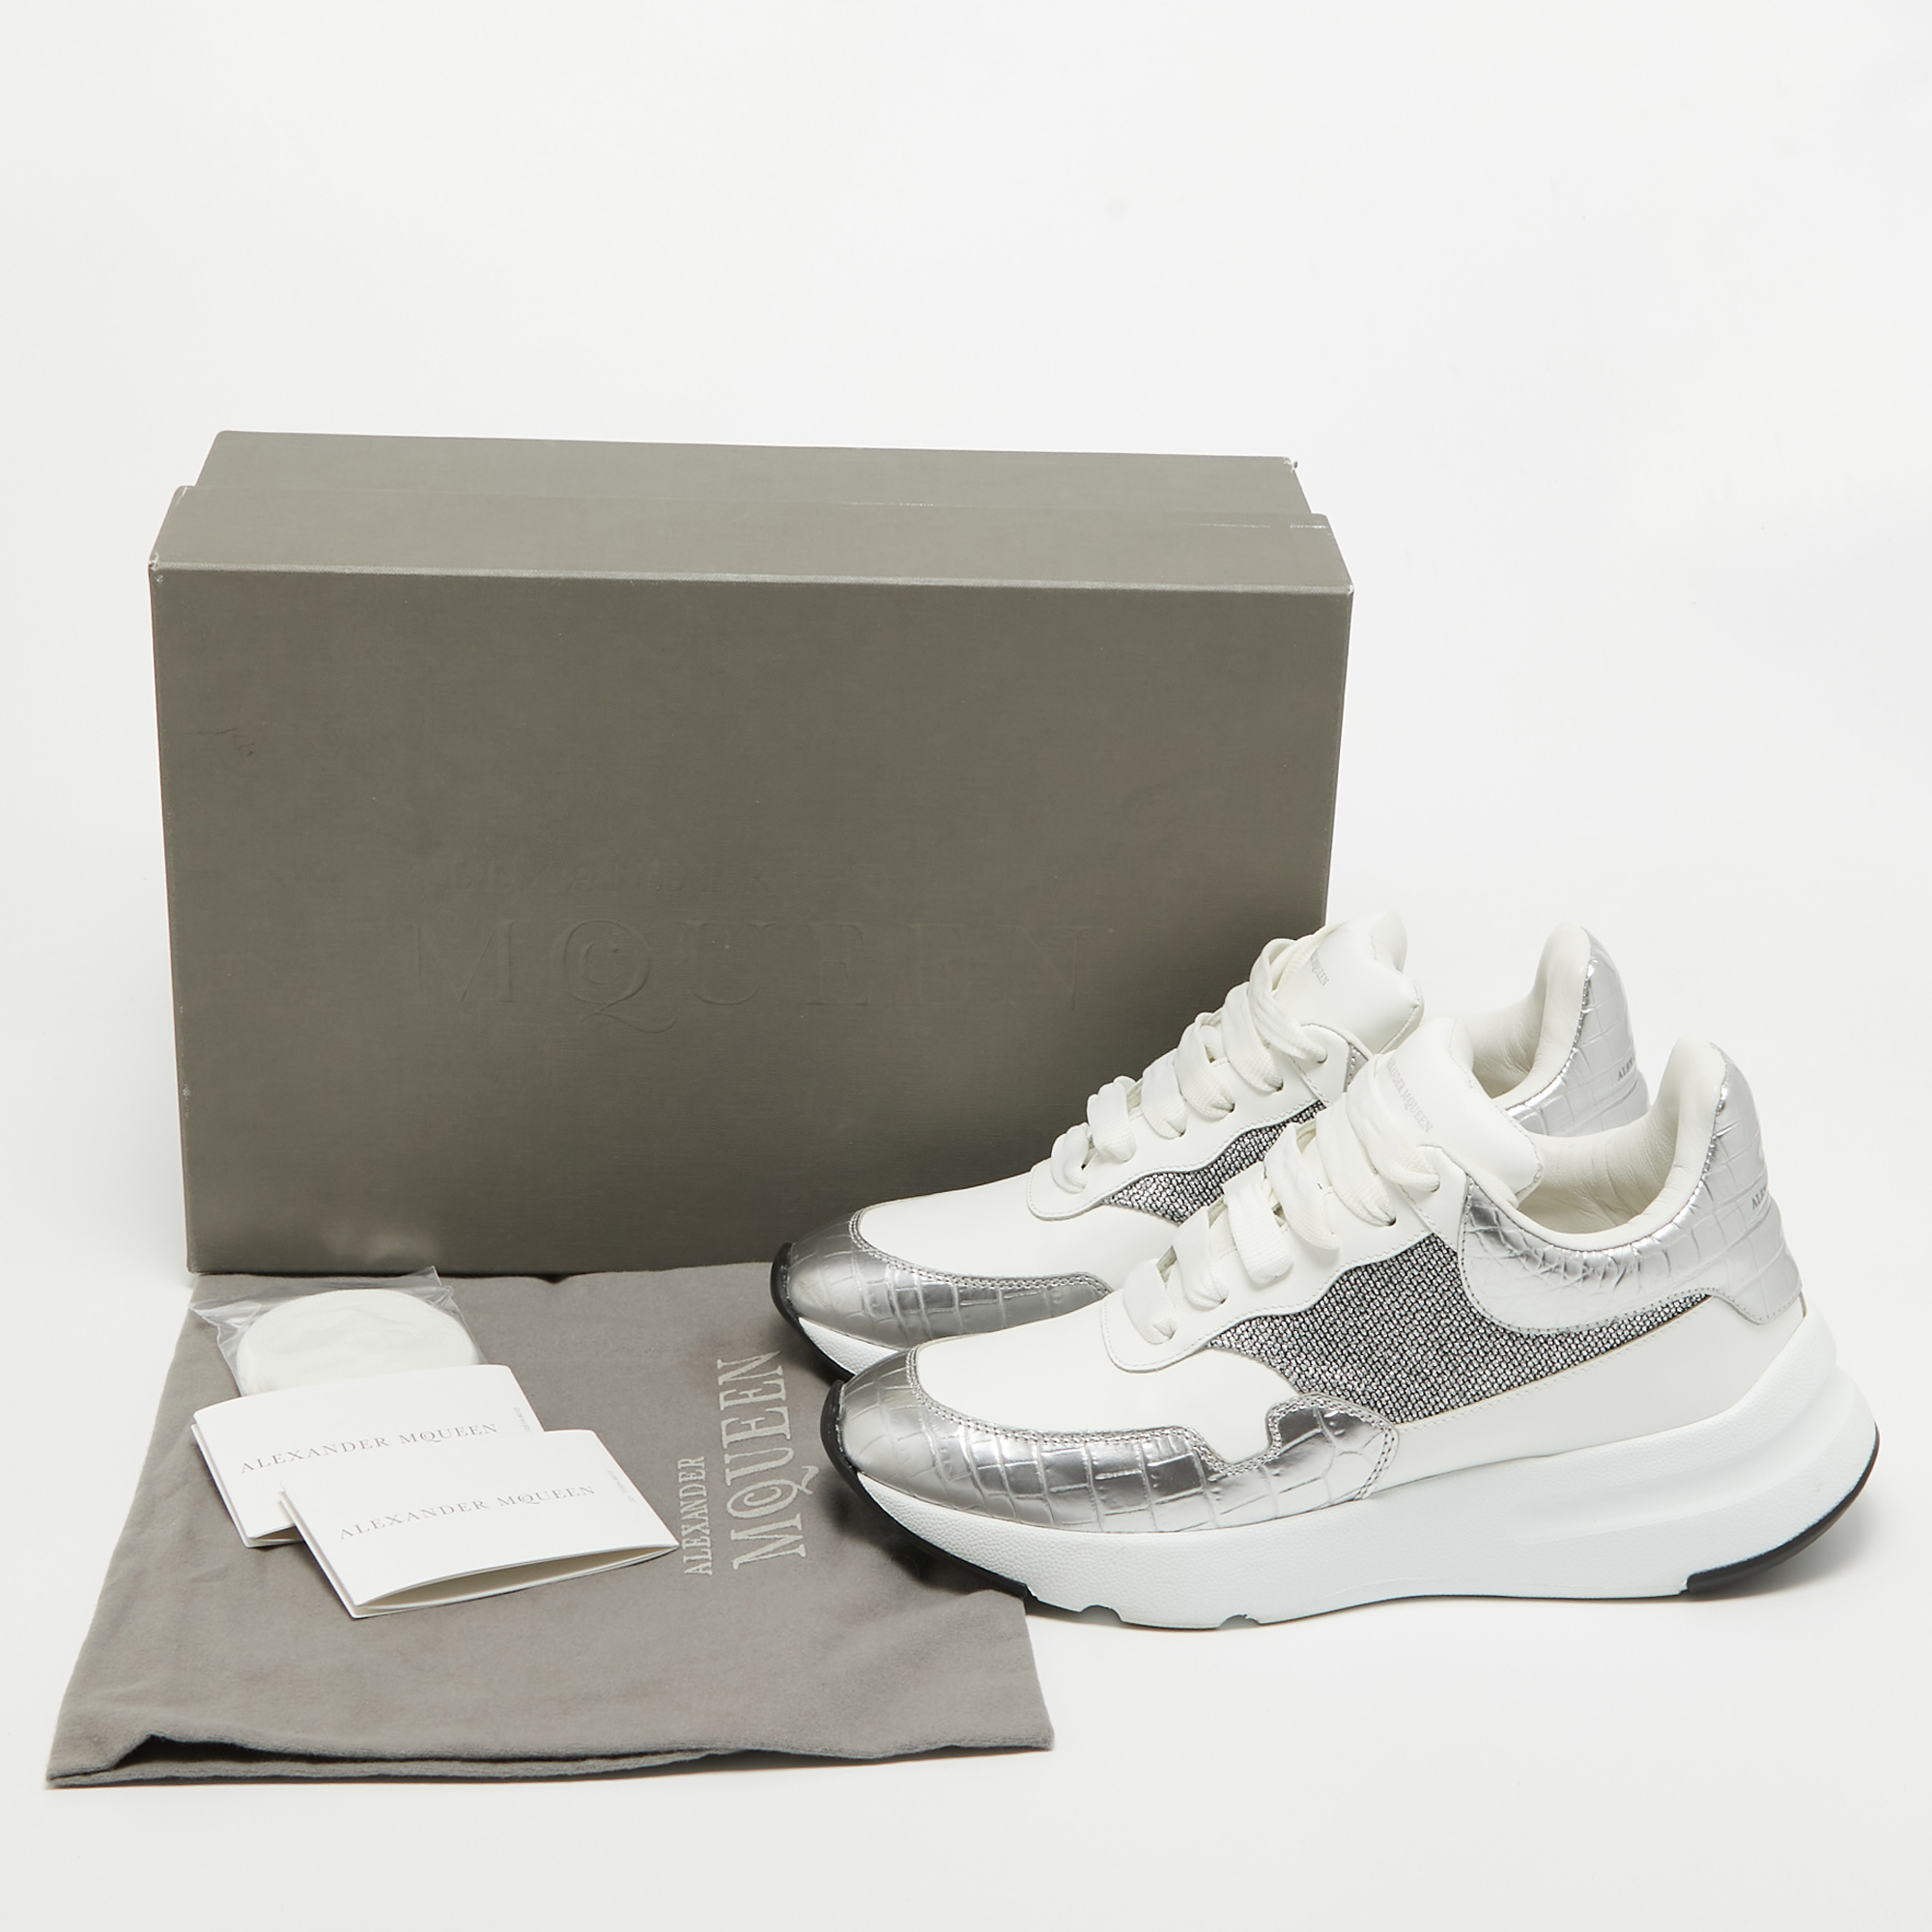 Alexander McQueen White/Silver Croc Embossed And Leather Larry Sneakers Size 40.5